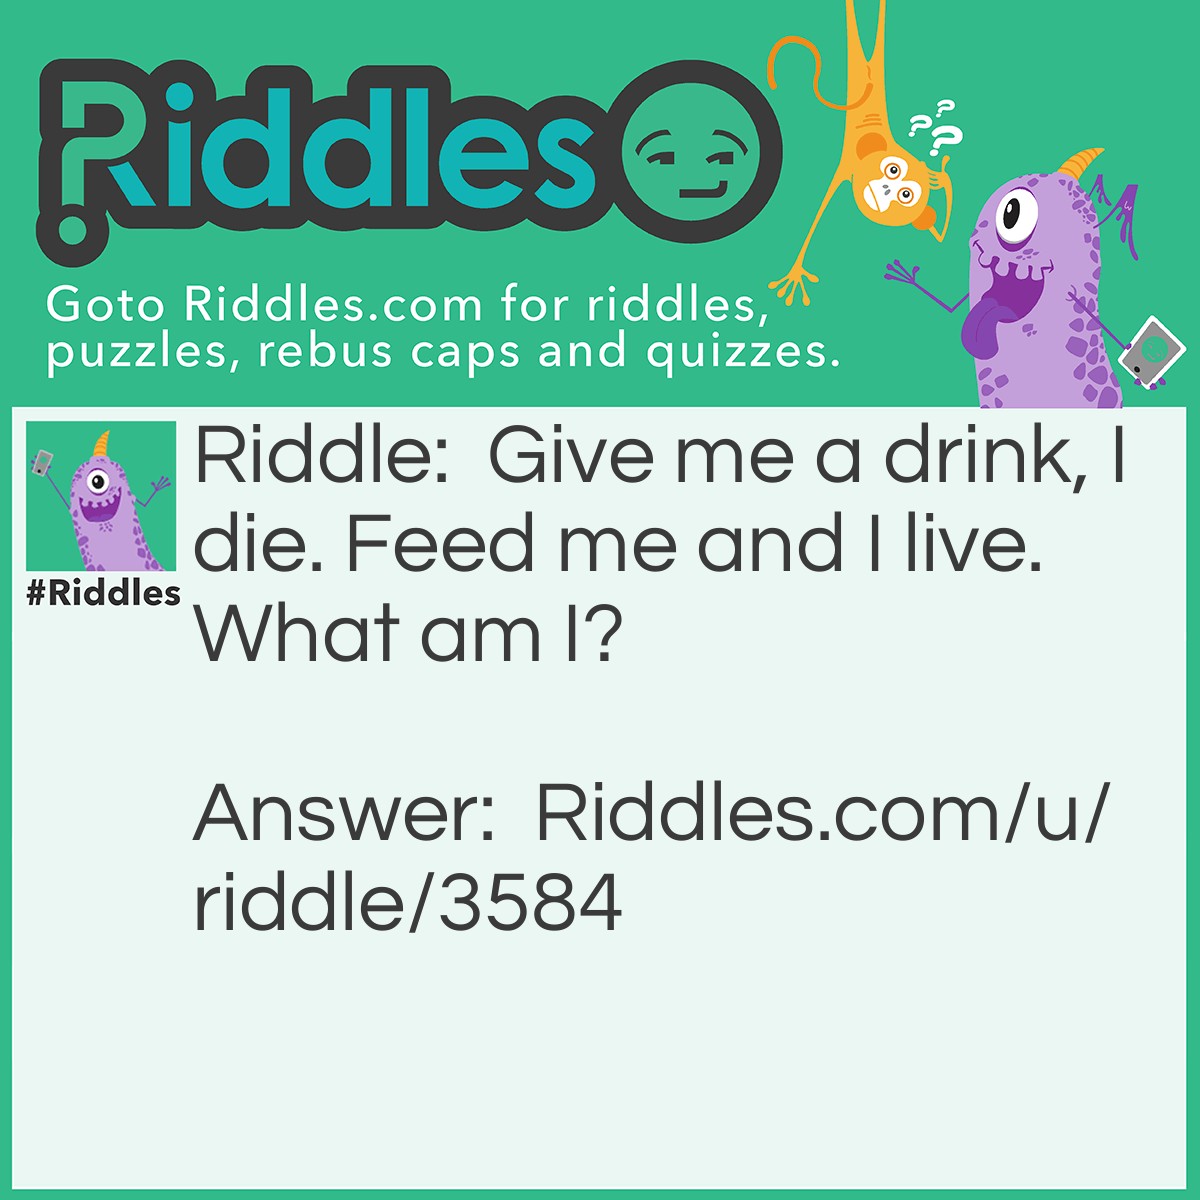 Riddle: Give me a drink, I die. Feed me and I live. What am I? Answer: Fire.